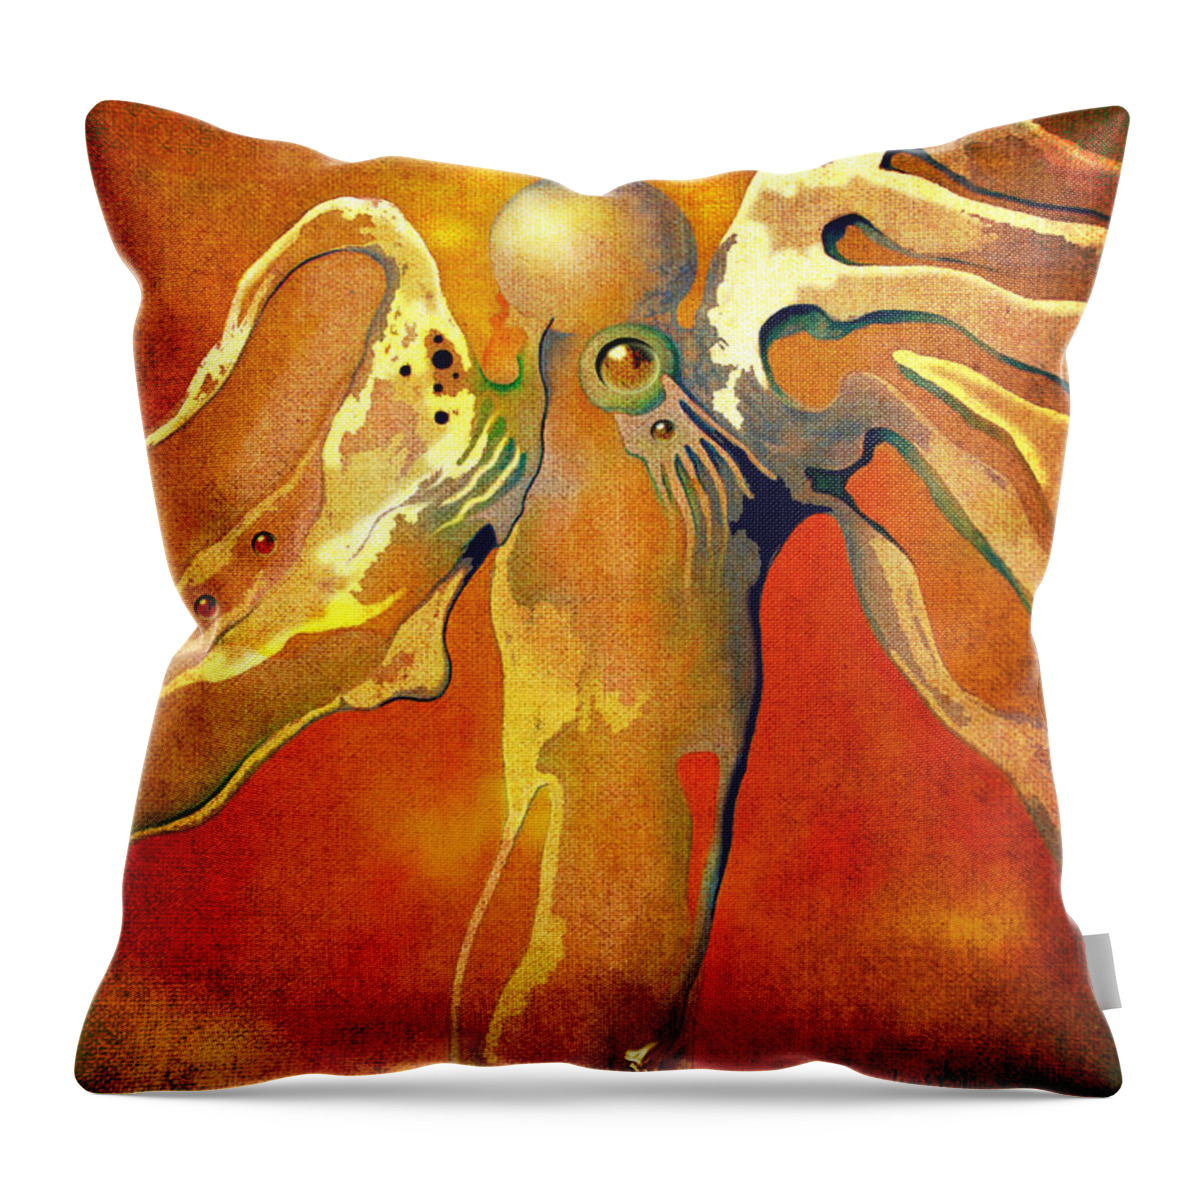 Angel Throw Pillow featuring the painting Lonely Angel by Alexa Szlavics